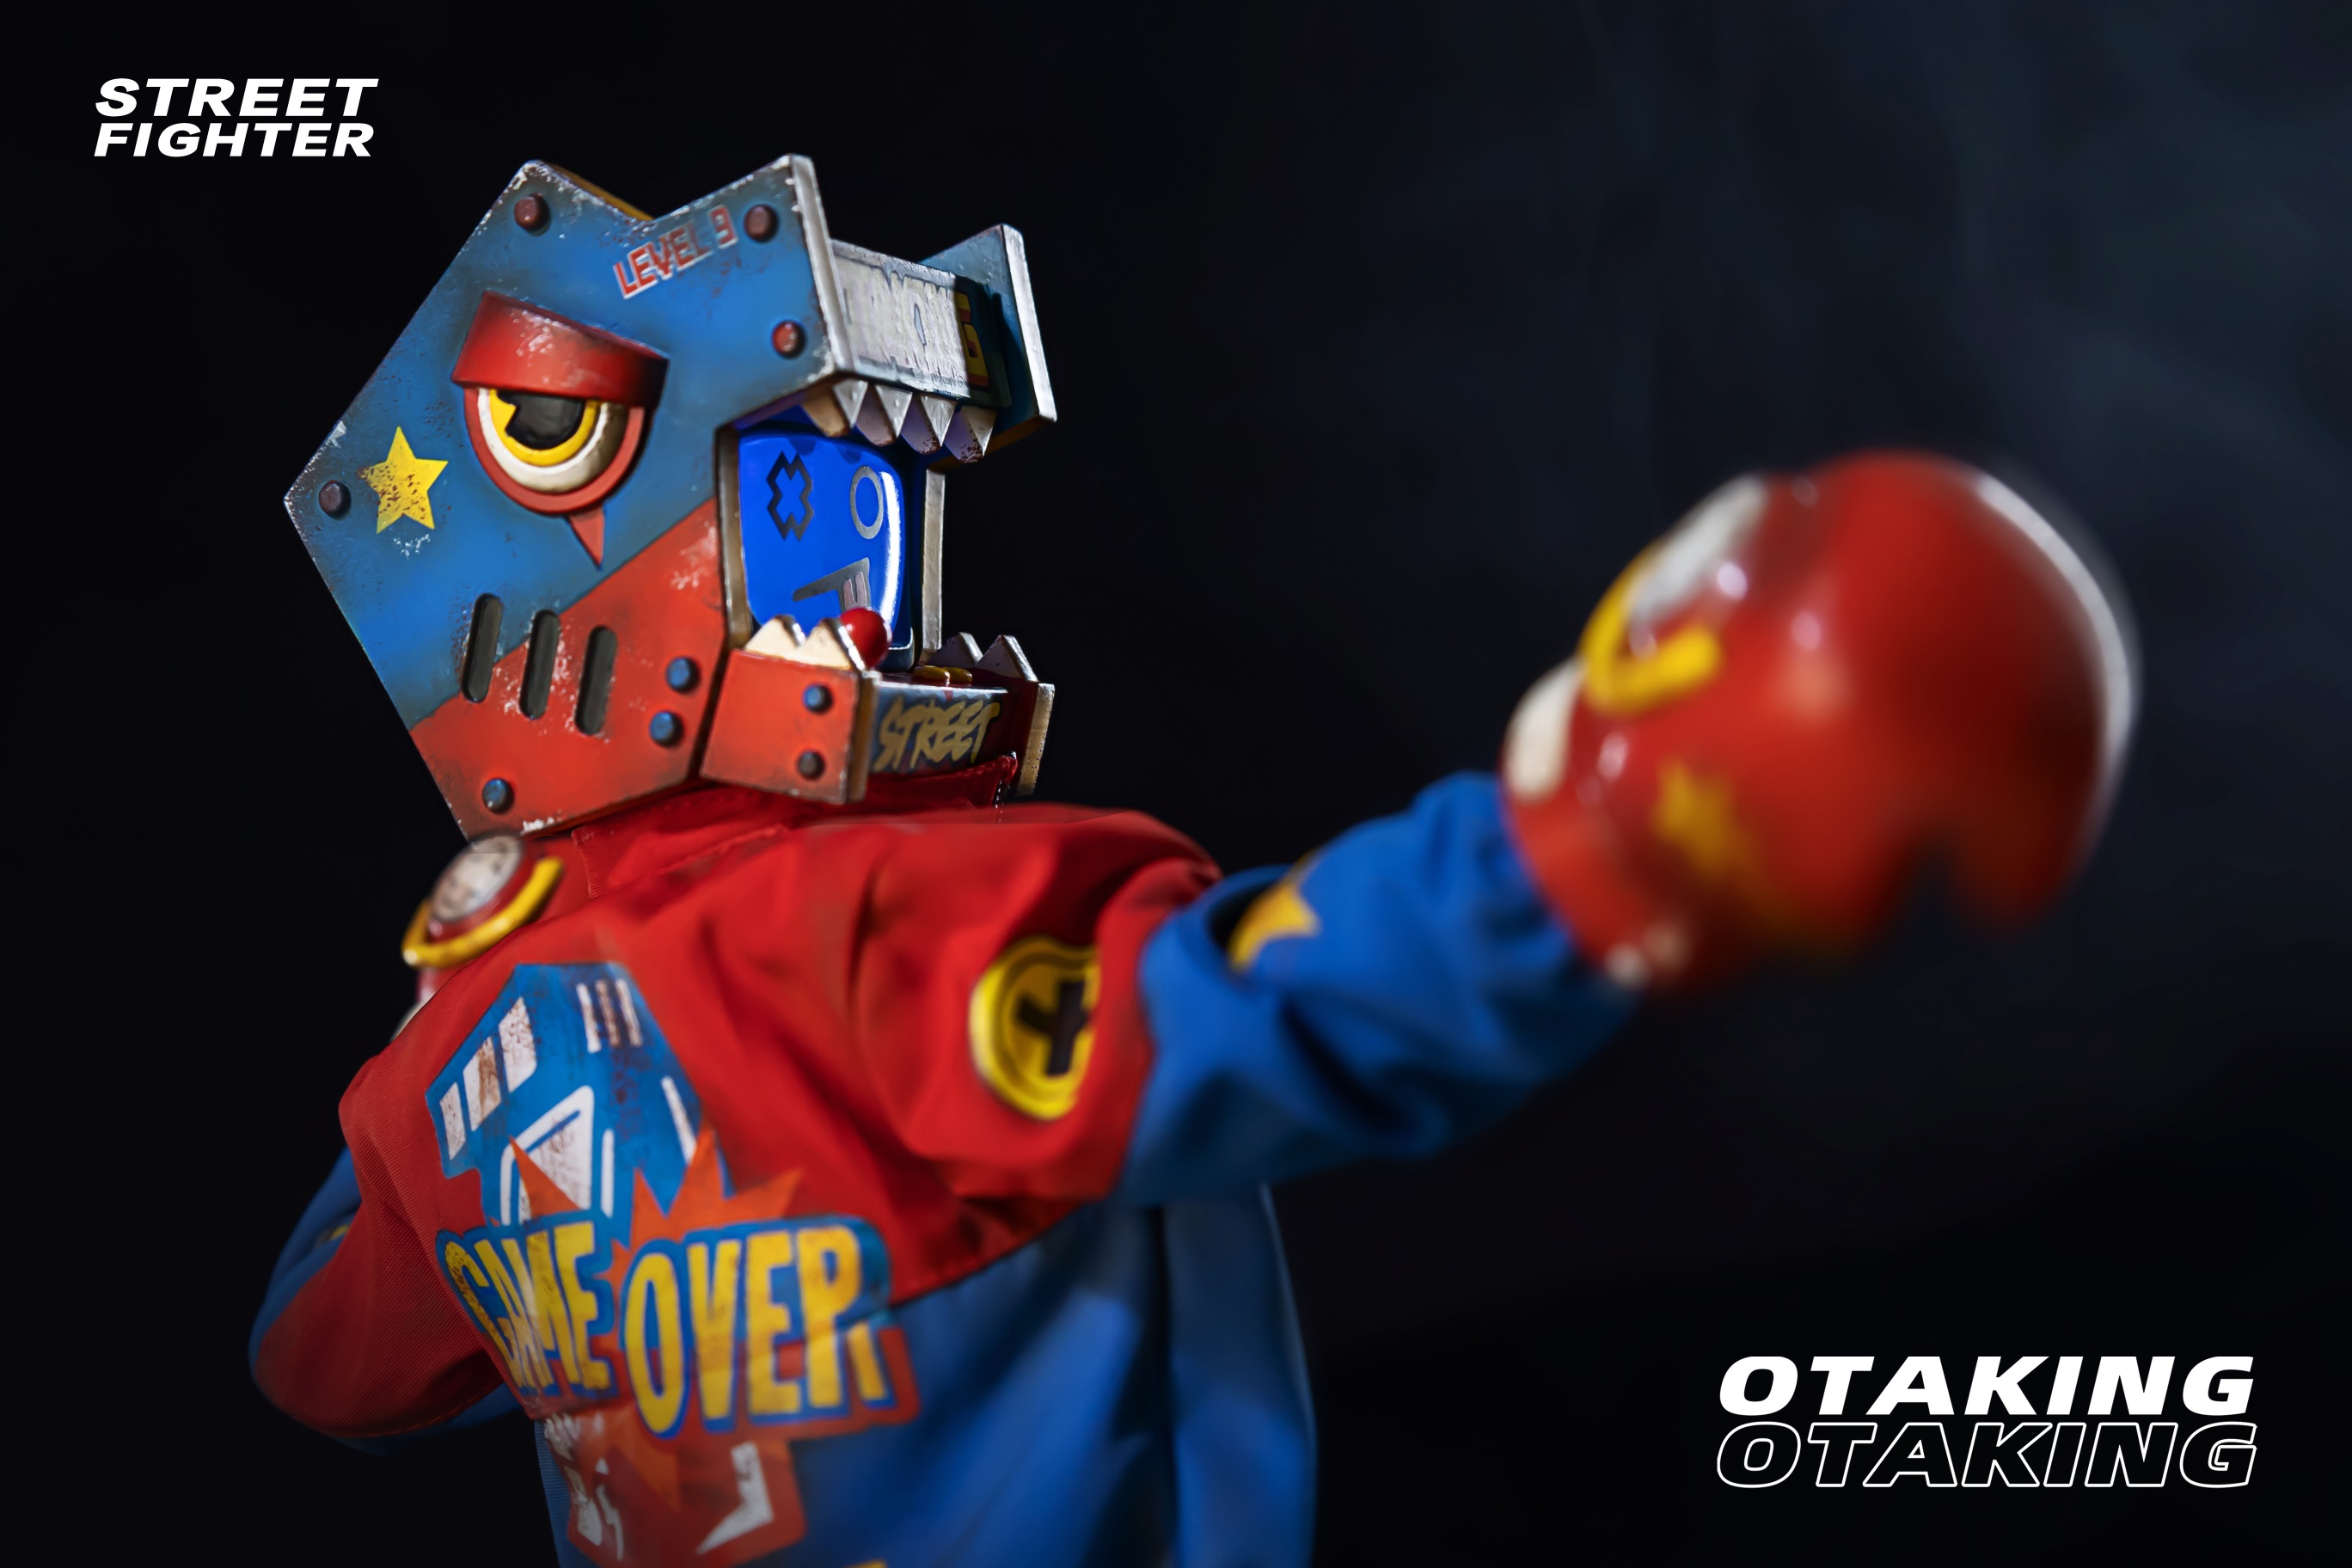 A person wearing a garment, a toy robot, a red boxing glove, and a yellow star on a blue surface, part of the OTAKING - Street Fighter collection.